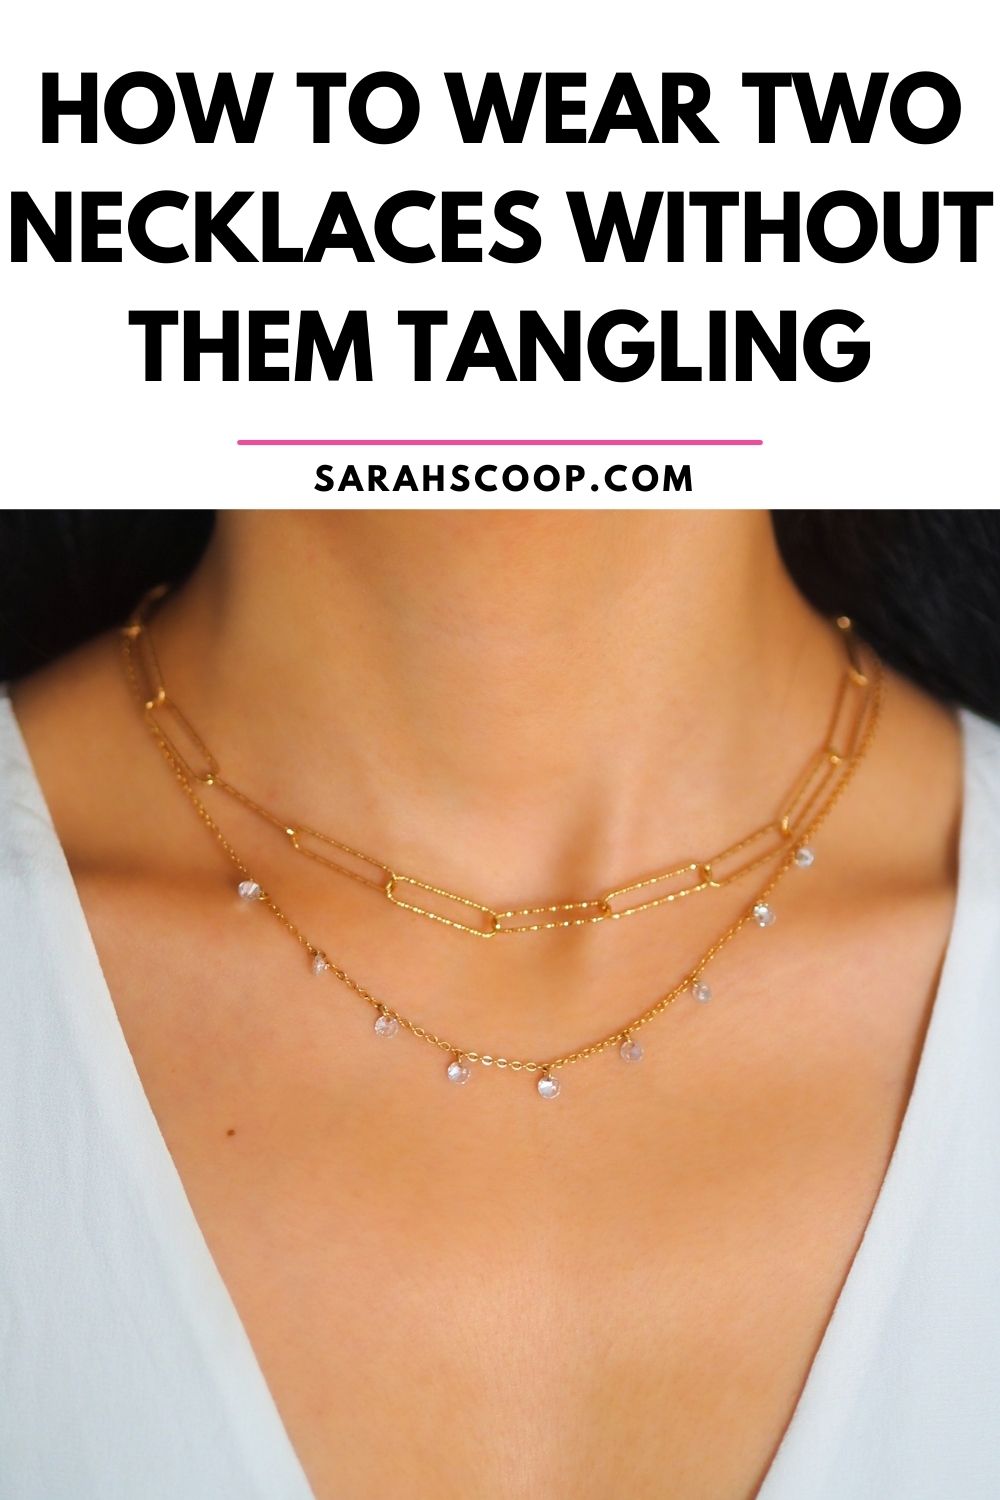 How to Keep Necklaces from Tangling? – GirlsGlitter